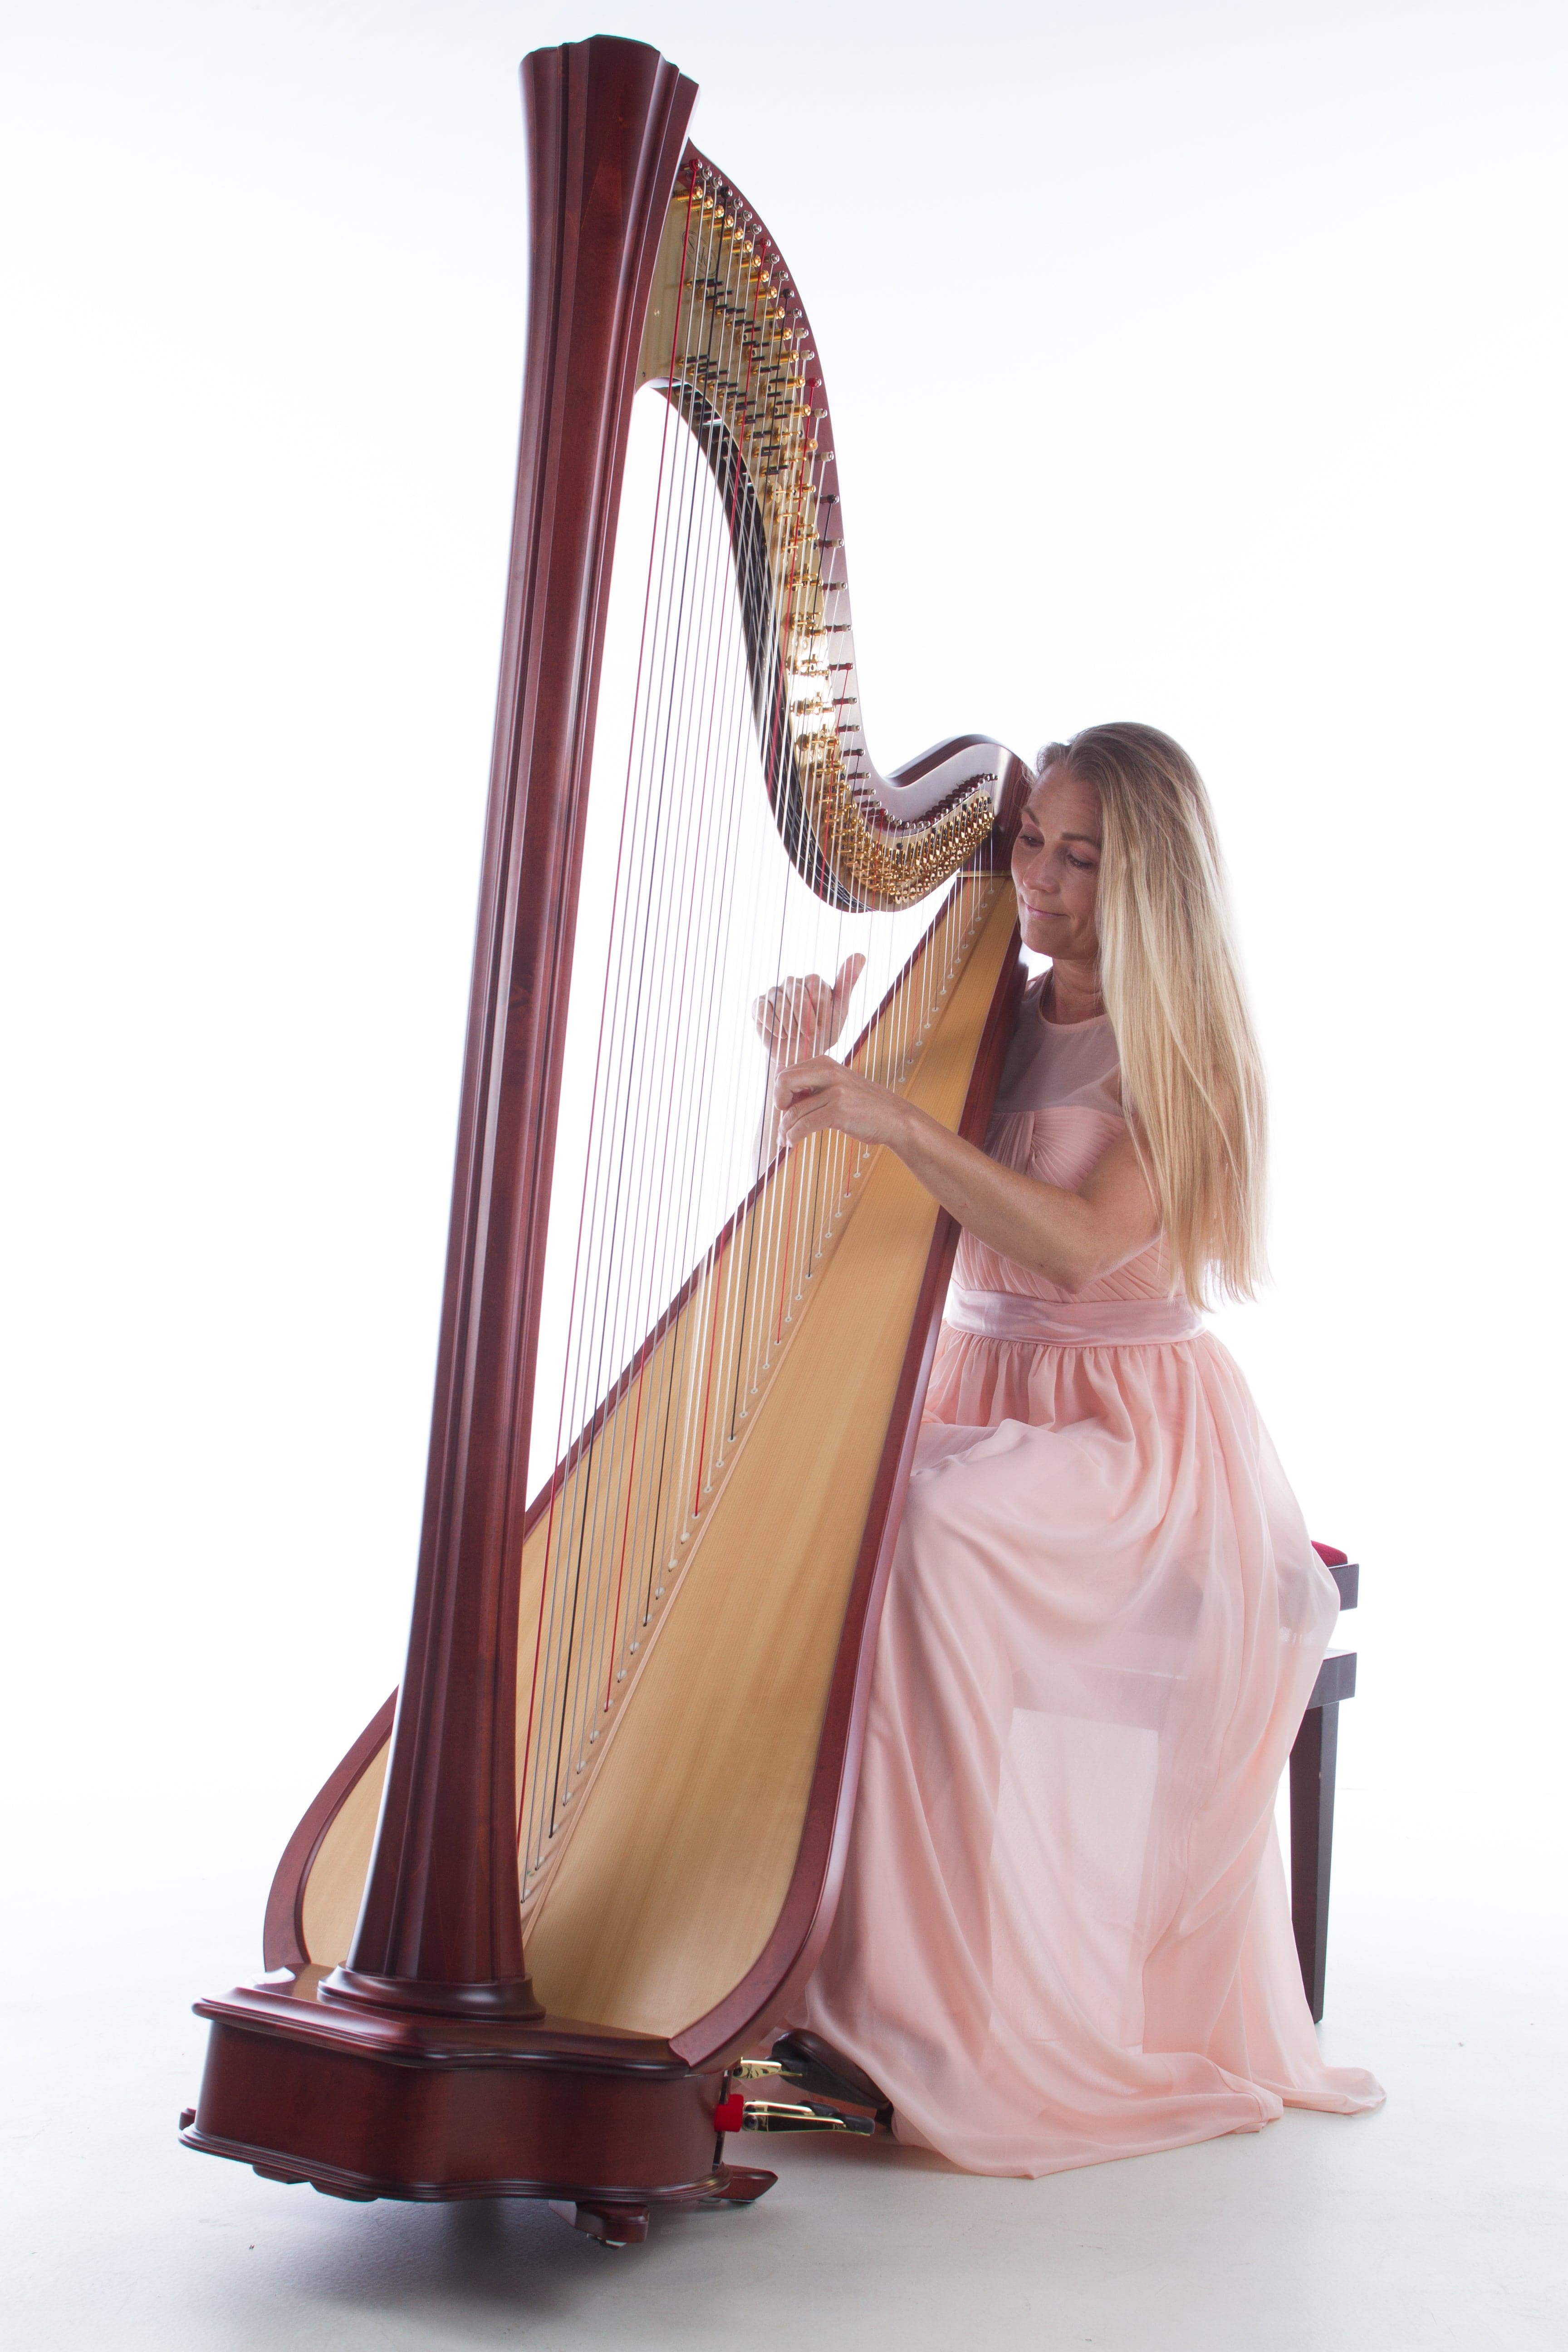 CD Harp for Hearts, composed and played by Ingrid Hütten